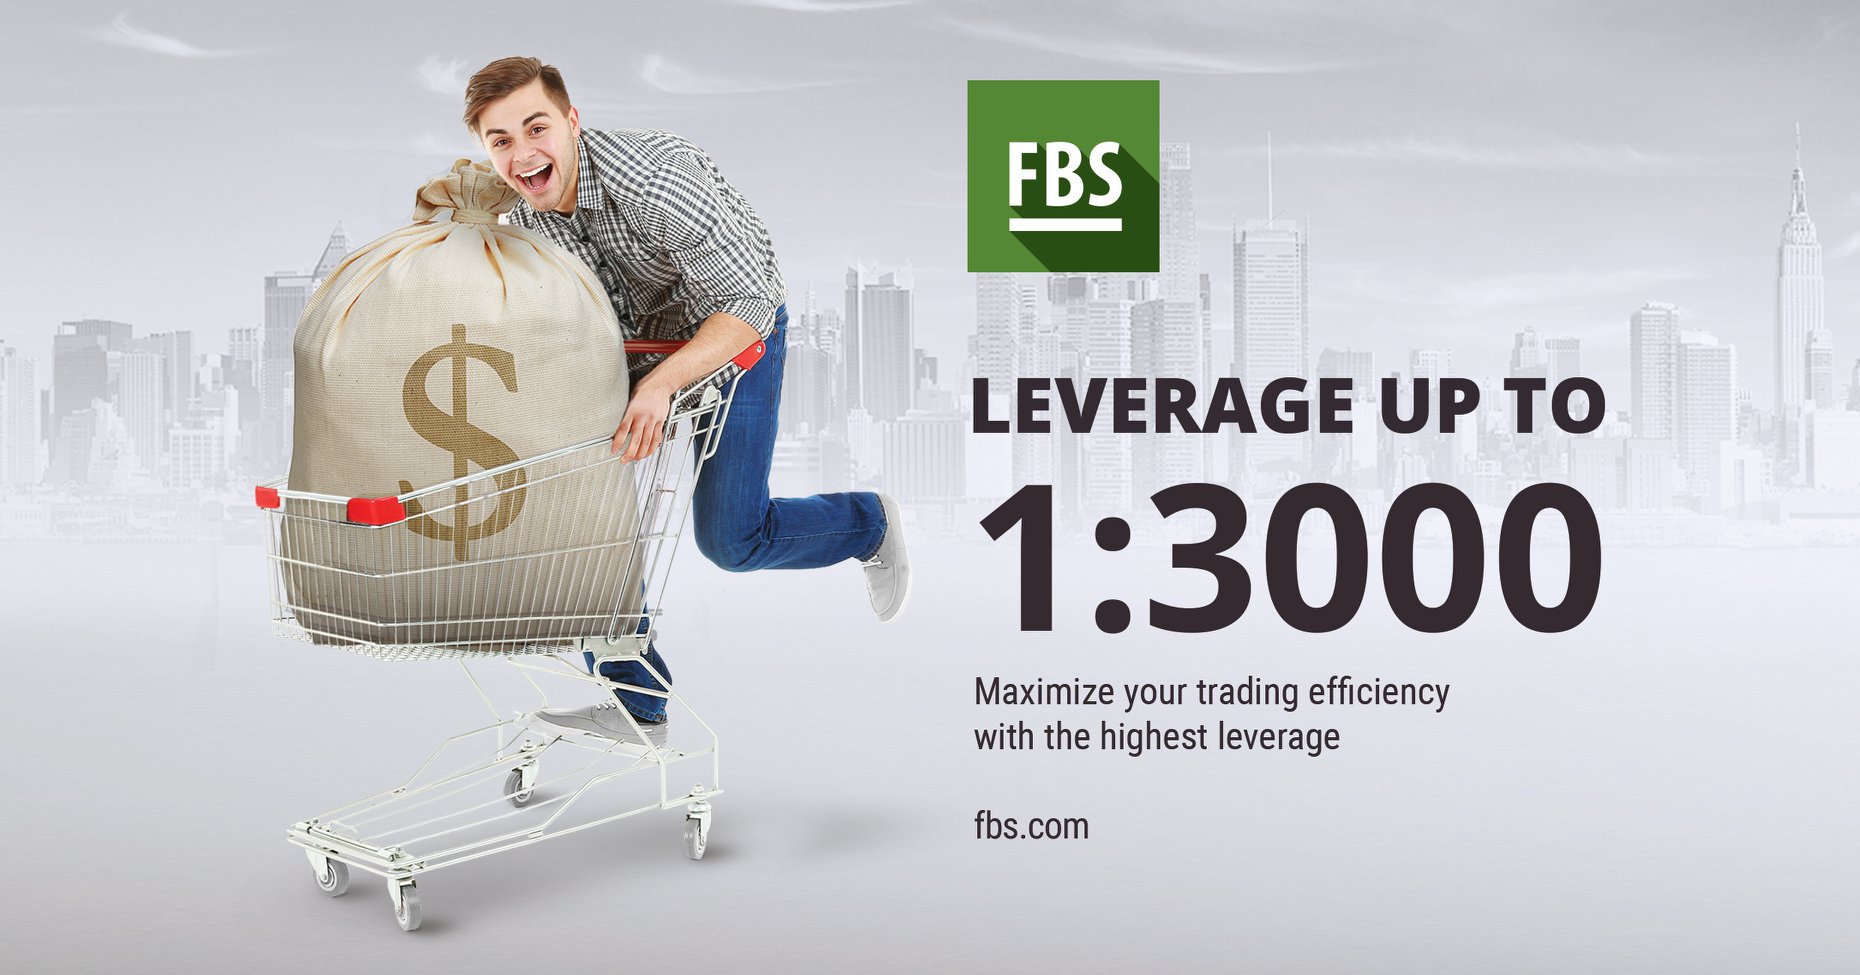 FBS offers with the highest leverage 3000 forex cfd mt4 mt5